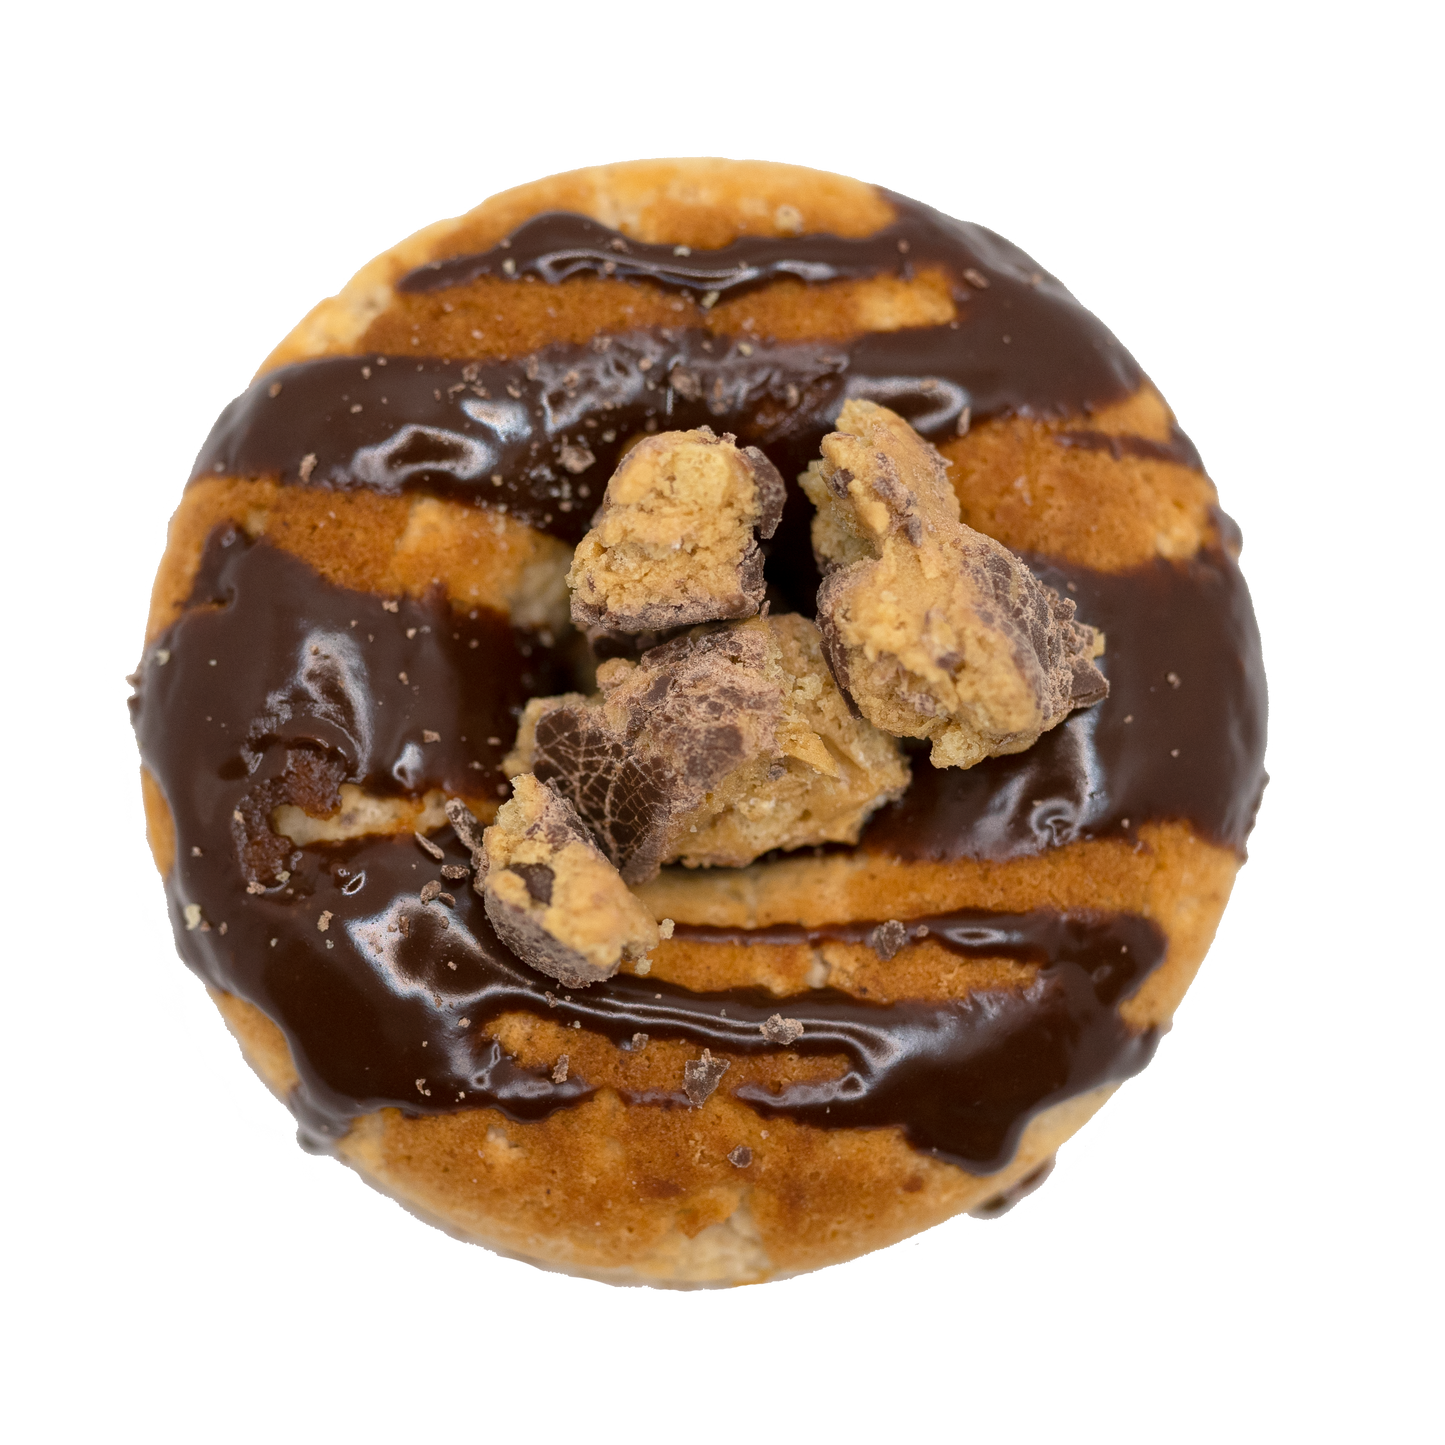 Peanut Butter Chocolate Protein Donut (4 pcs)